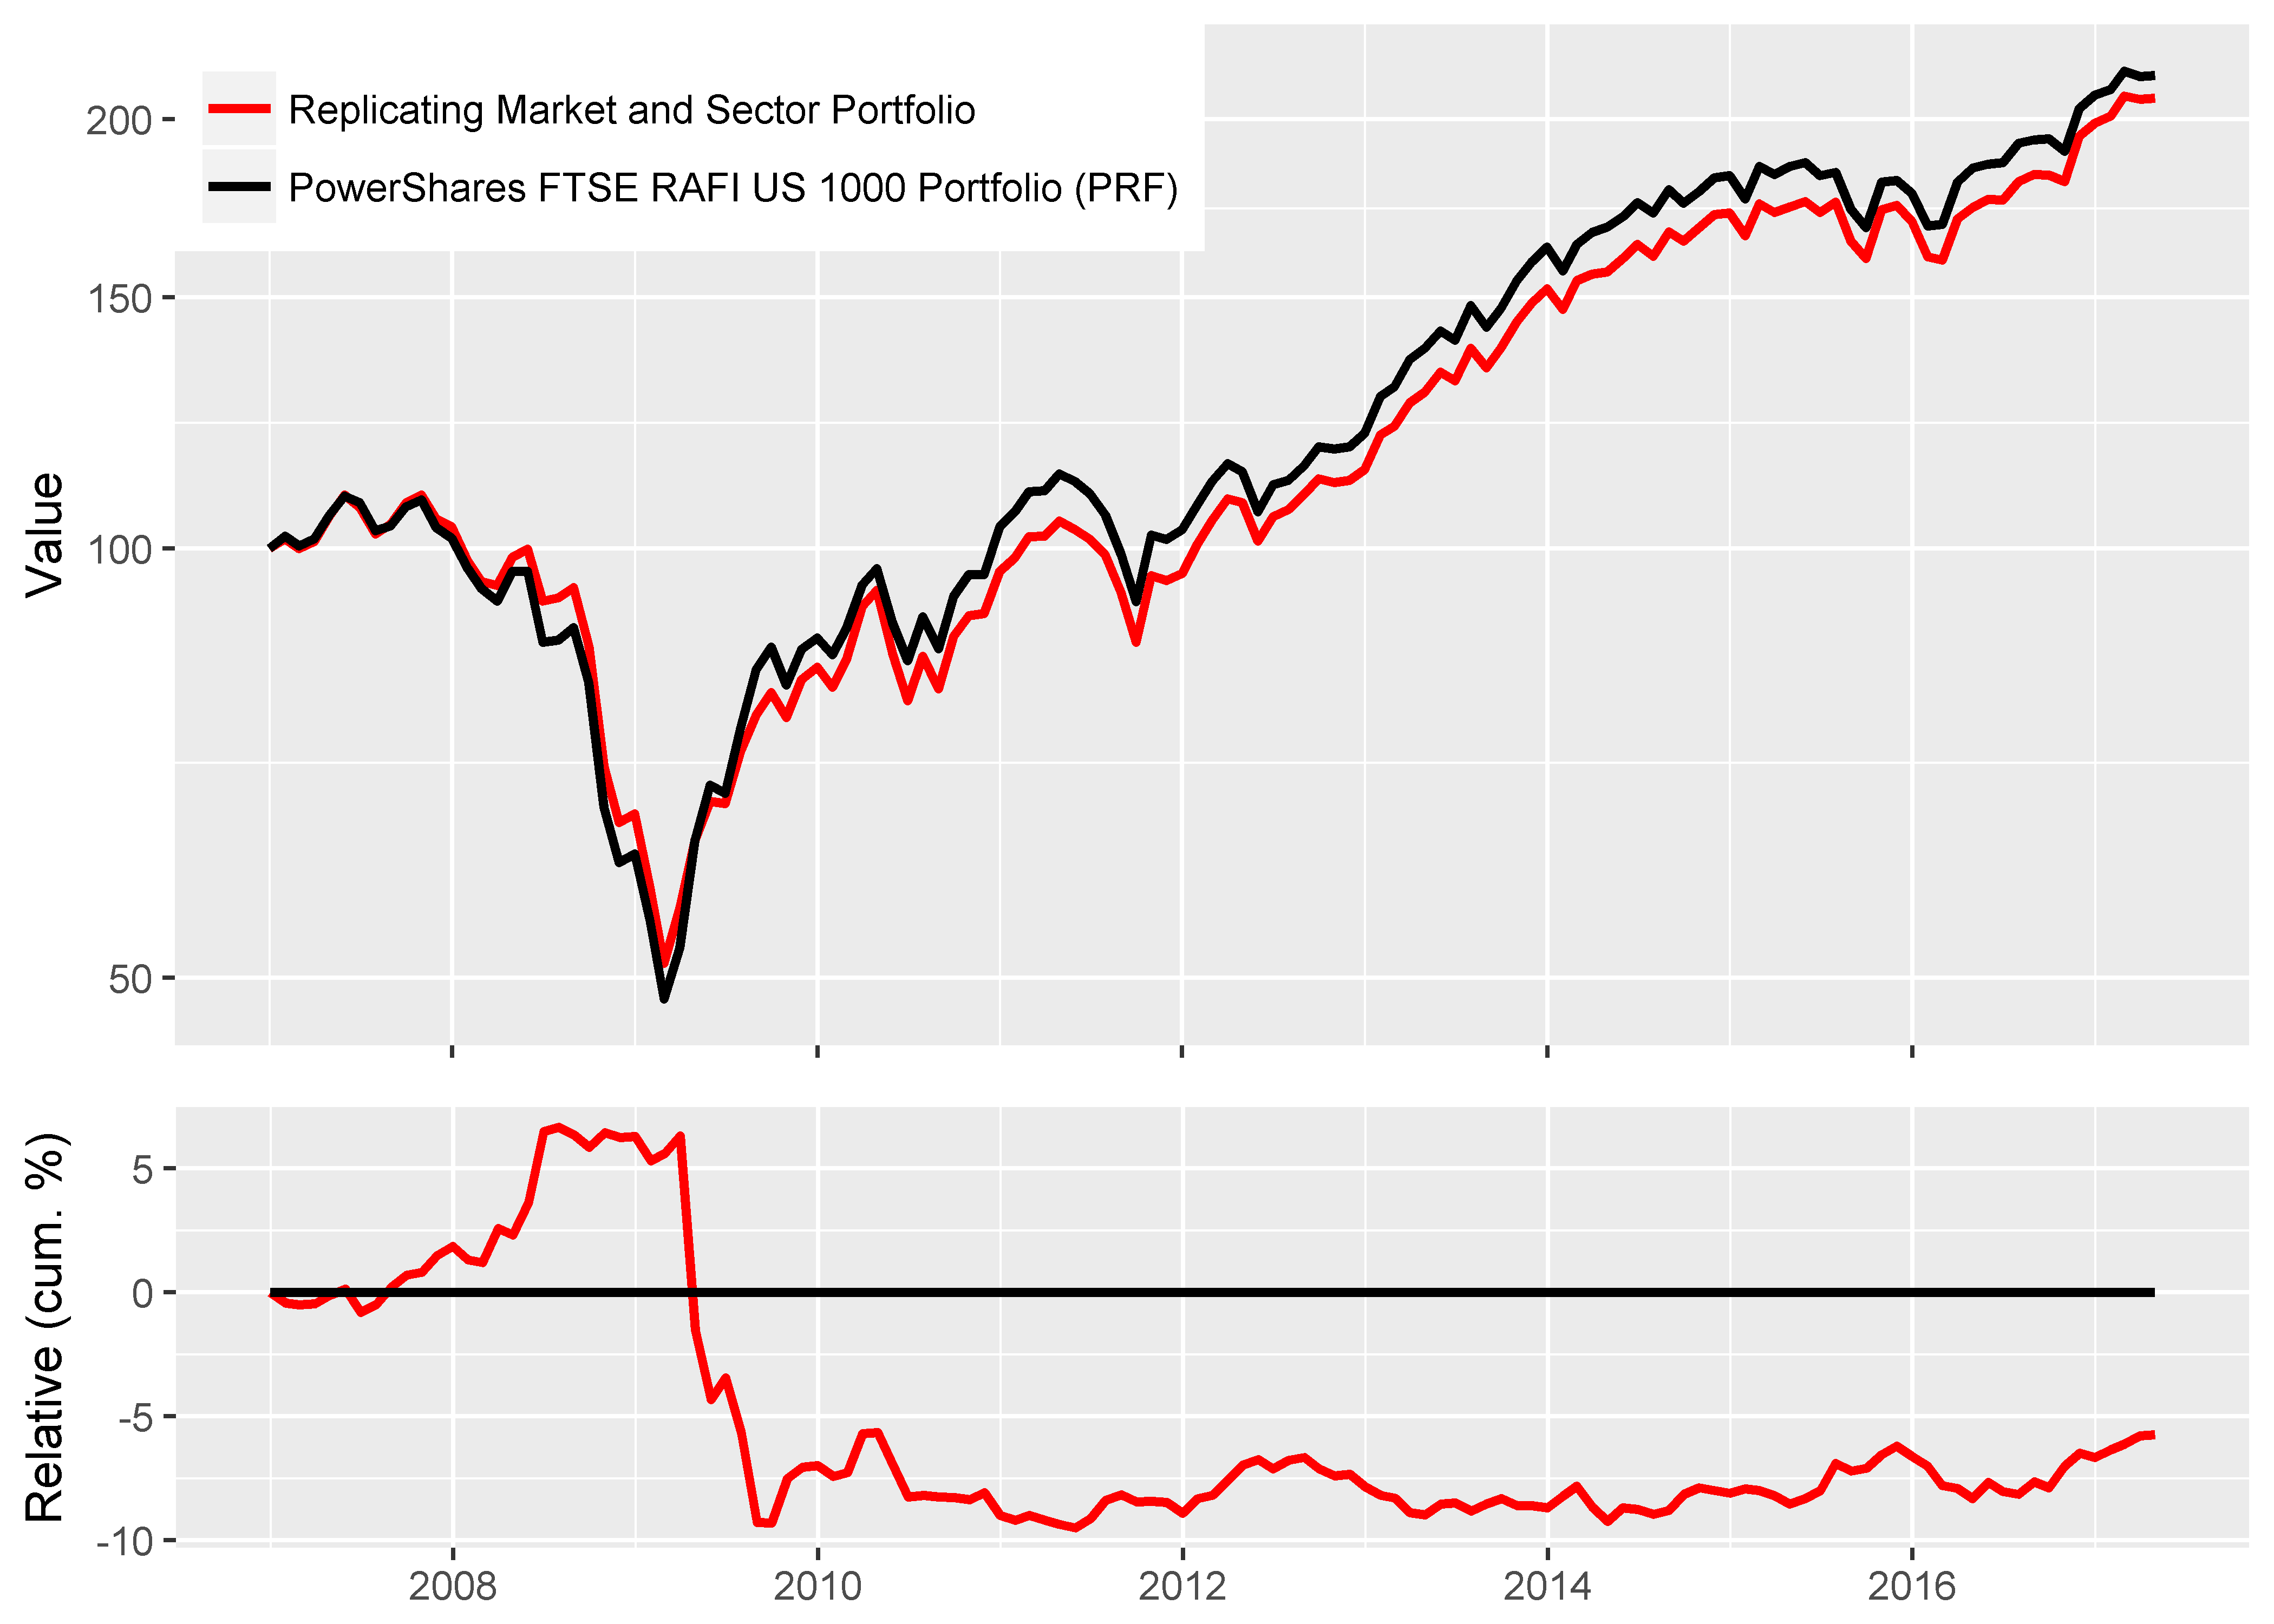 Chart of the absolute and relative returns of PowerShares FTSE RAFI US 1000 Portfolio (PRF) and a replicating Market and Sector Factor tilt portfolio